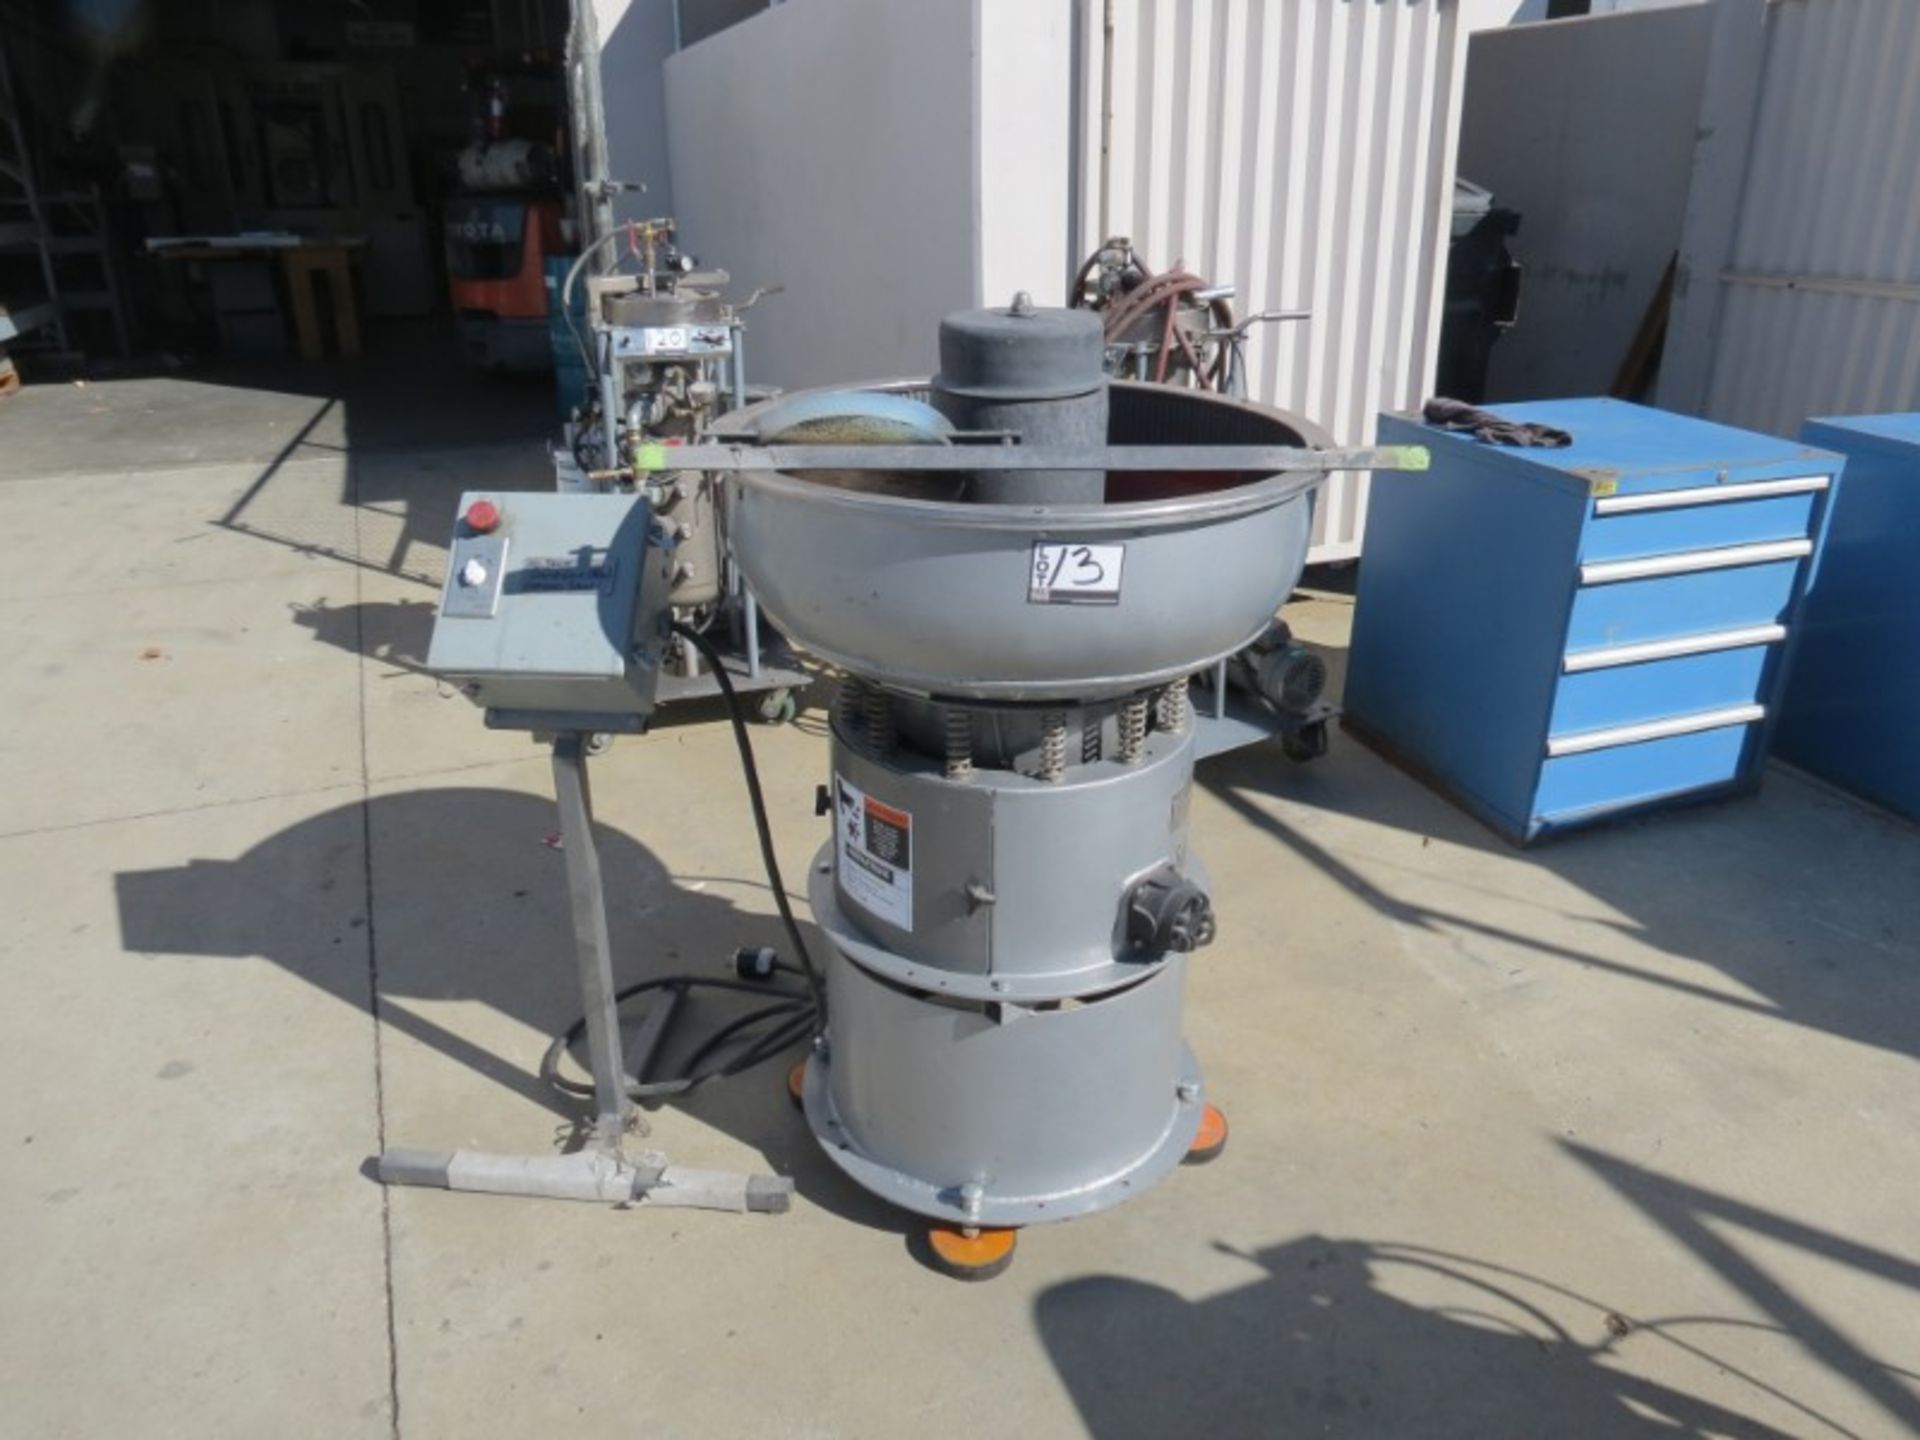 Sweco Vibro-Energy FM-3 Vibratory Deburrer, s/n FM-1161-15 (Moved Outside for Photos)